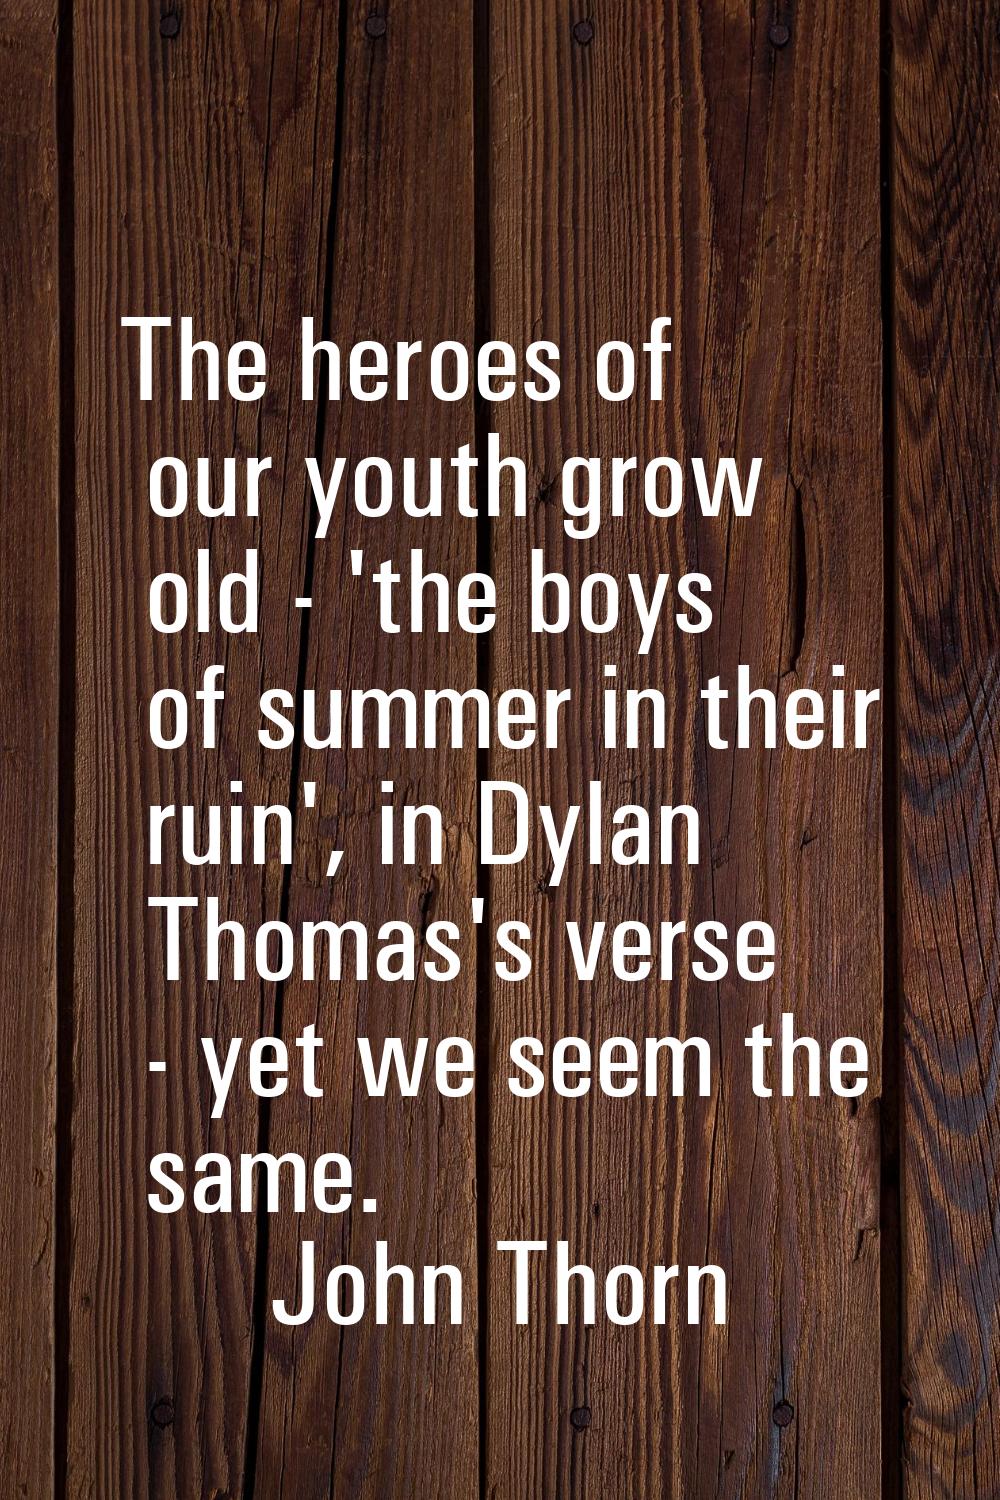 The heroes of our youth grow old - 'the boys of summer in their ruin', in Dylan Thomas's verse - ye